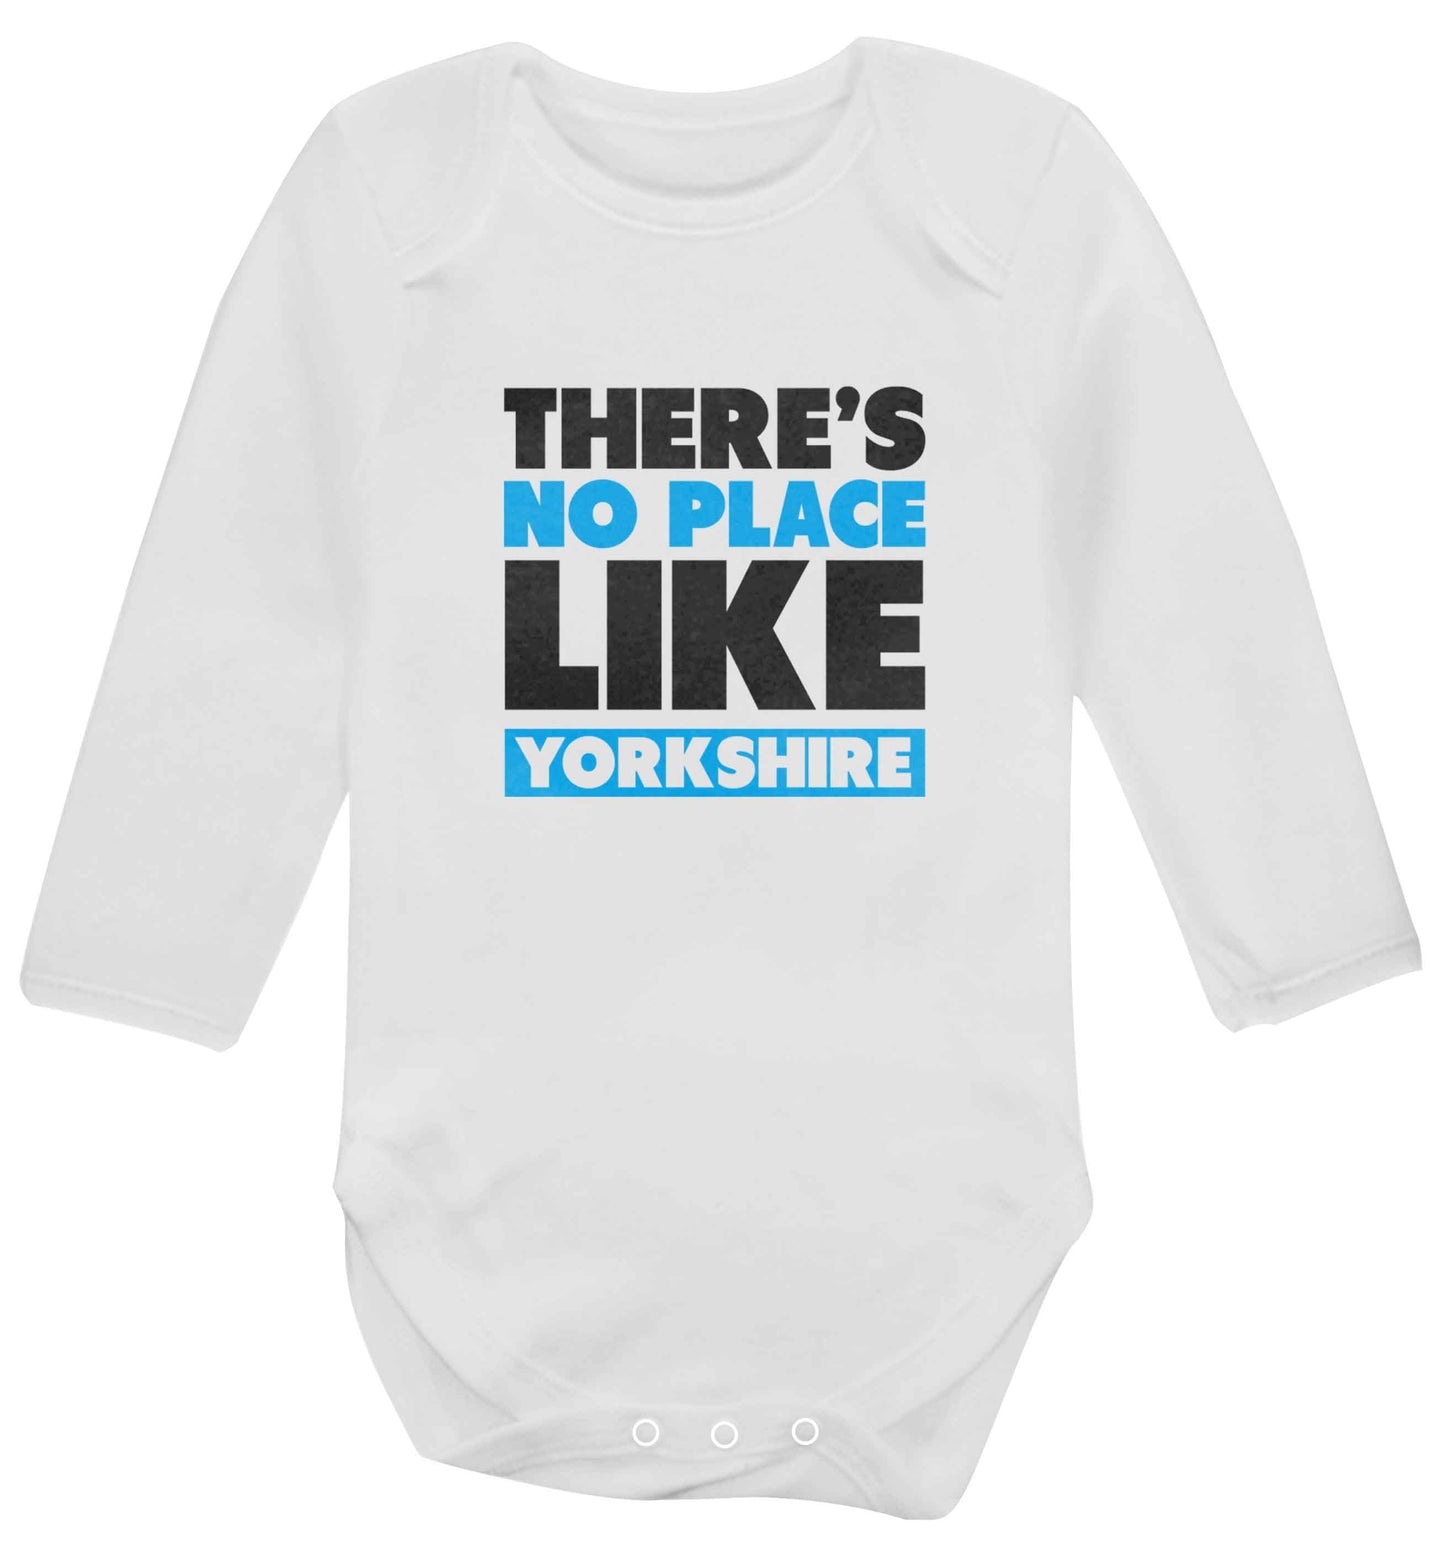 There's no place like Yorkshire baby vest long sleeved white 6-12 months